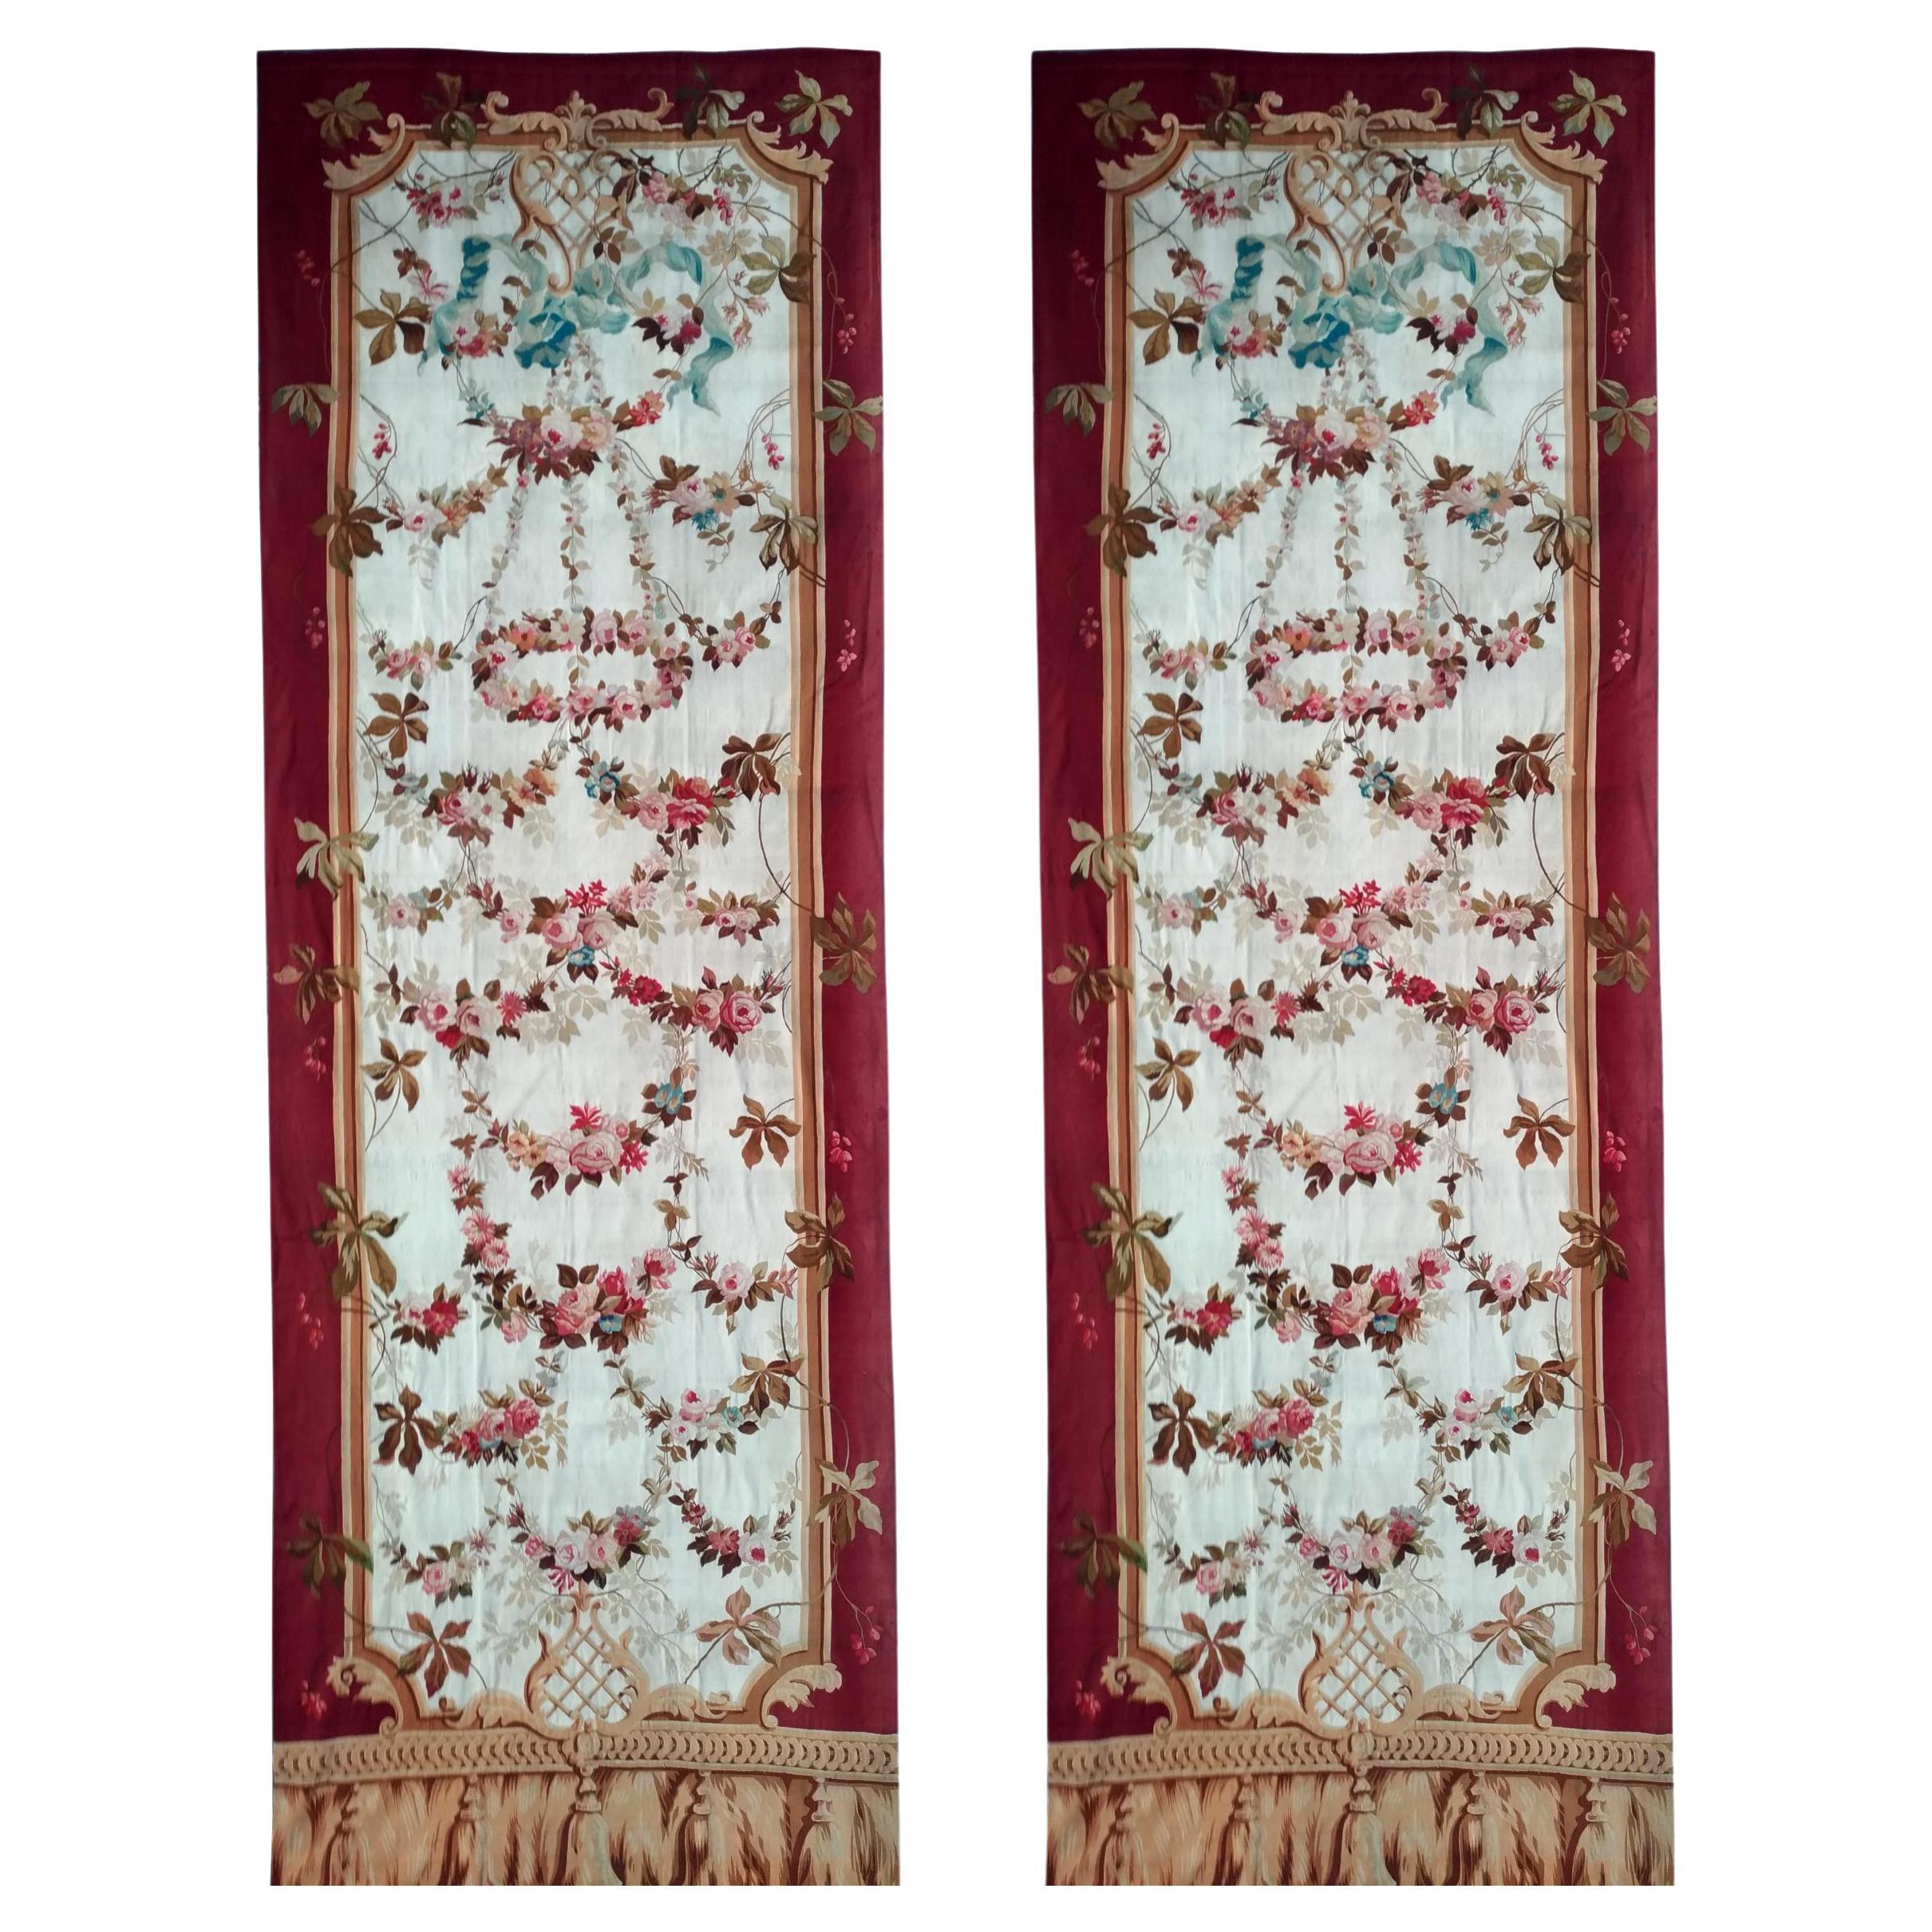 1082 -  Pair of Hand-Woven Aubusson Portieres, Mid-19th Century France